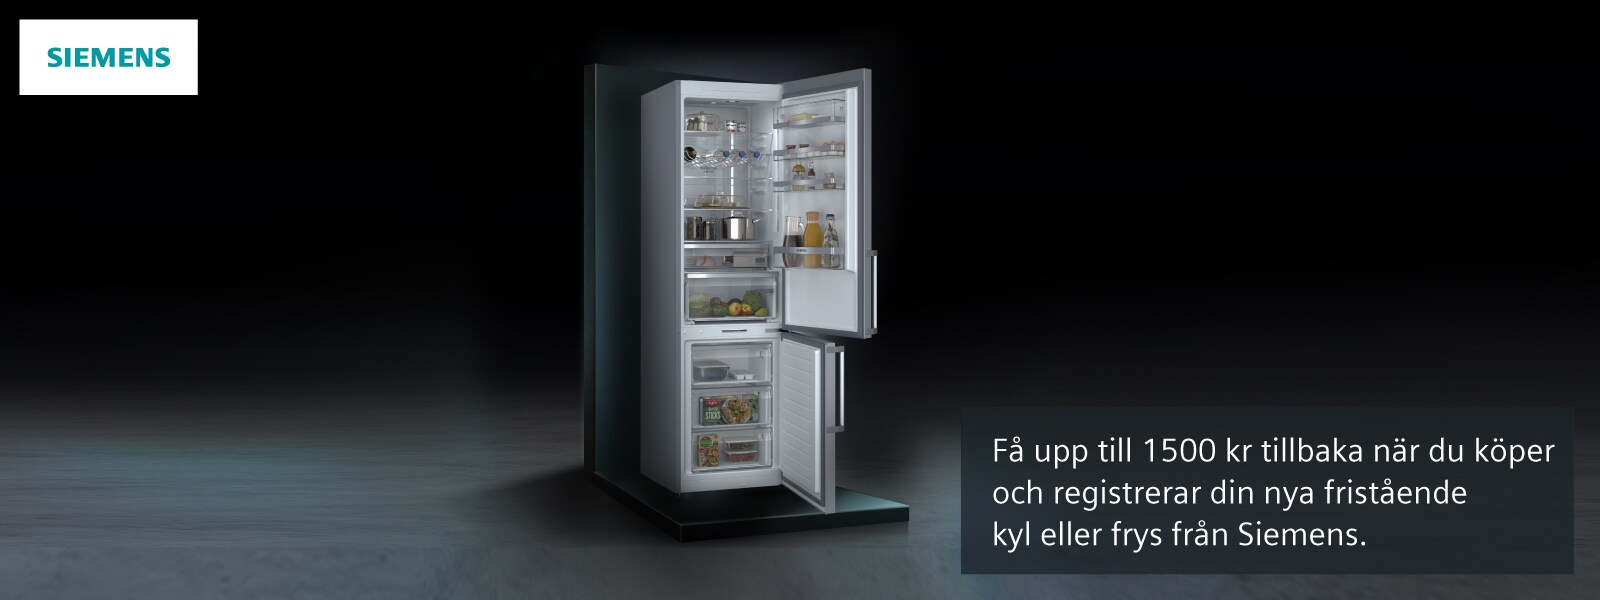 MDA-Cooling-Siemens top banner with campaign info in Swedish